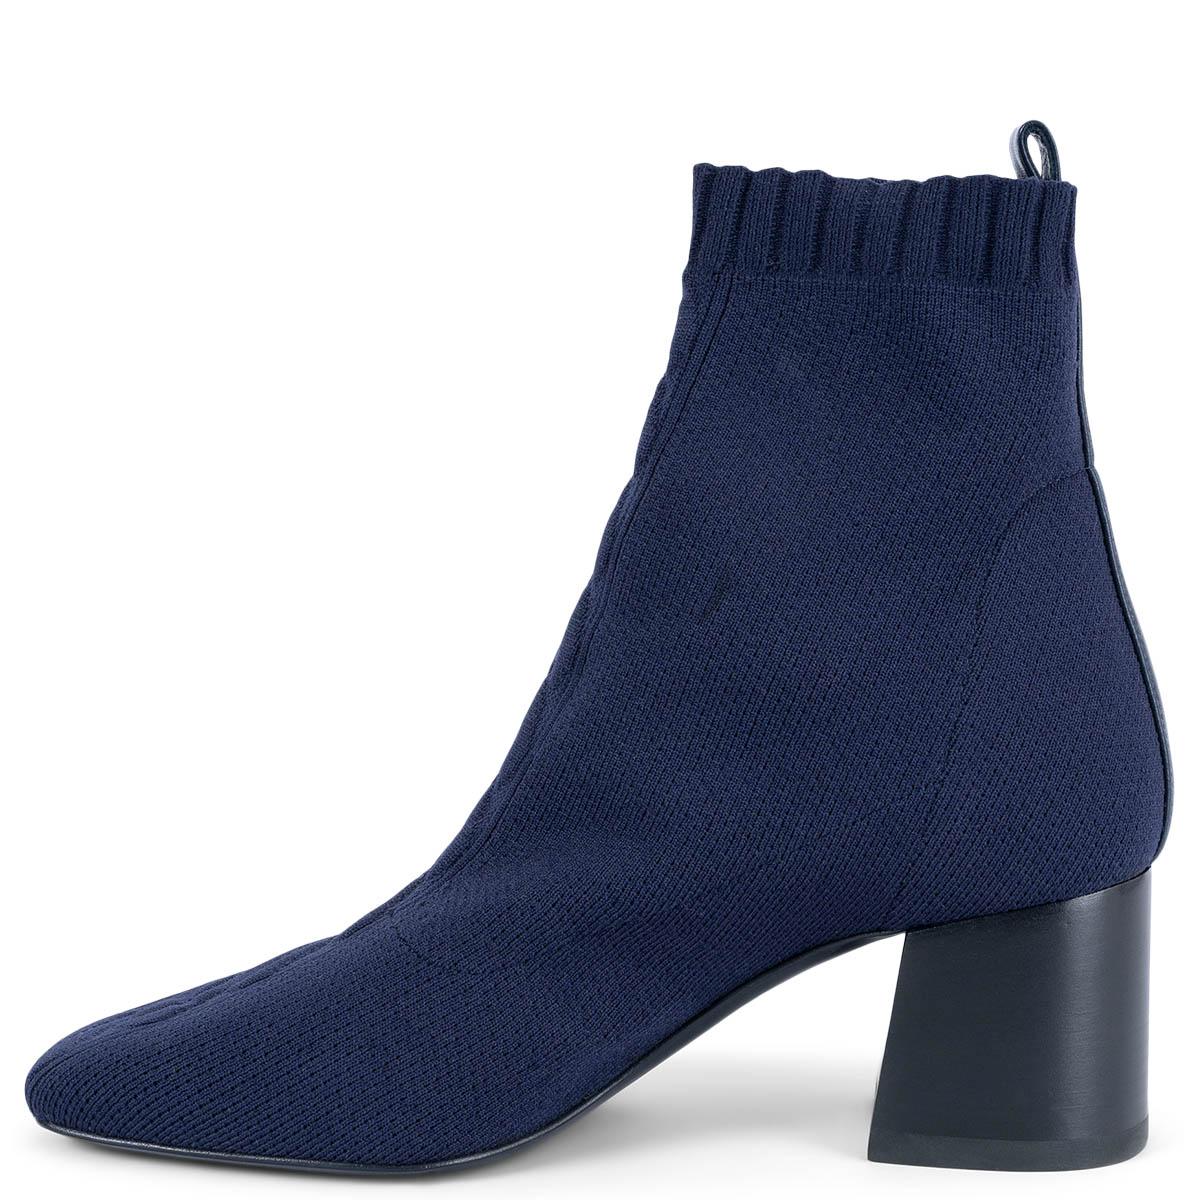 100% authentic Hermès Volver 60 sock ankle boots in Bleu Fonce (navy blue) knit with Clic! C'est Noue motif. Features calf leather Ex-Libris emblem and heel. Have been worn and are in excellent condition. 

Measurements
Model	H212163Z 49
Imprinted